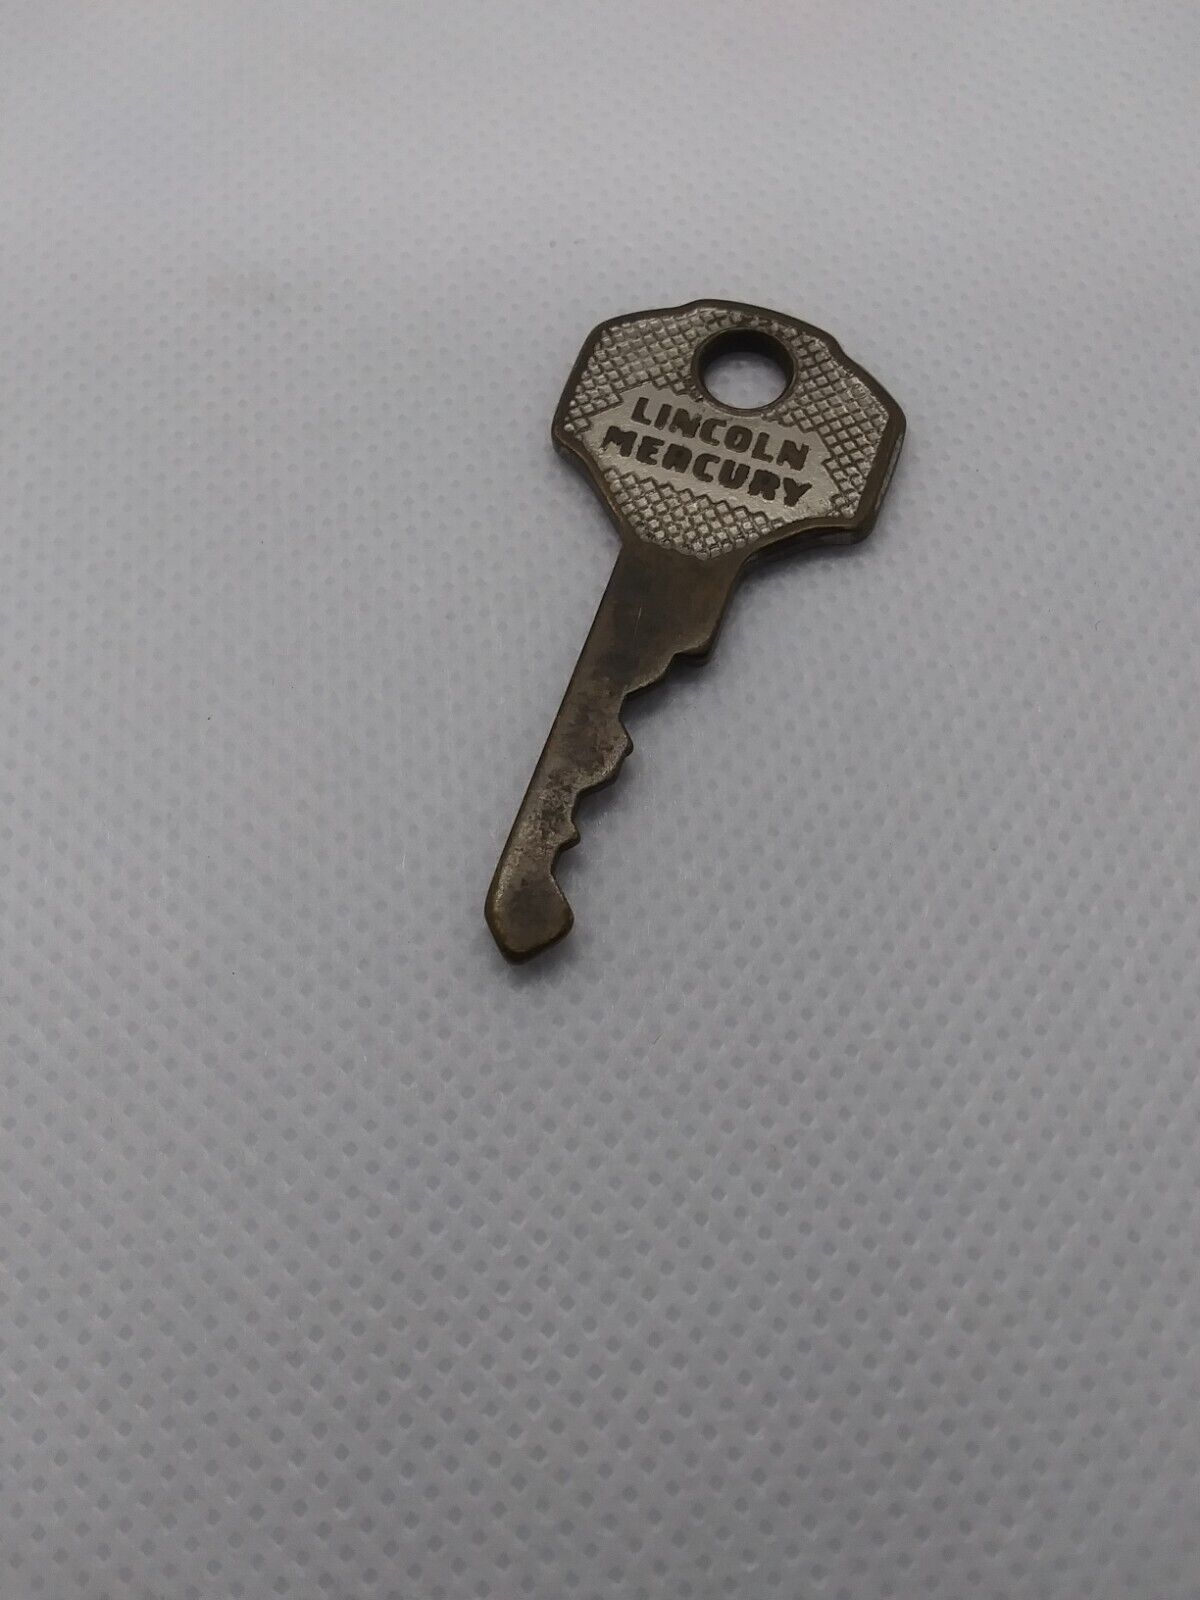 Vintage Lincoln Mercury Car  Key Made In USA